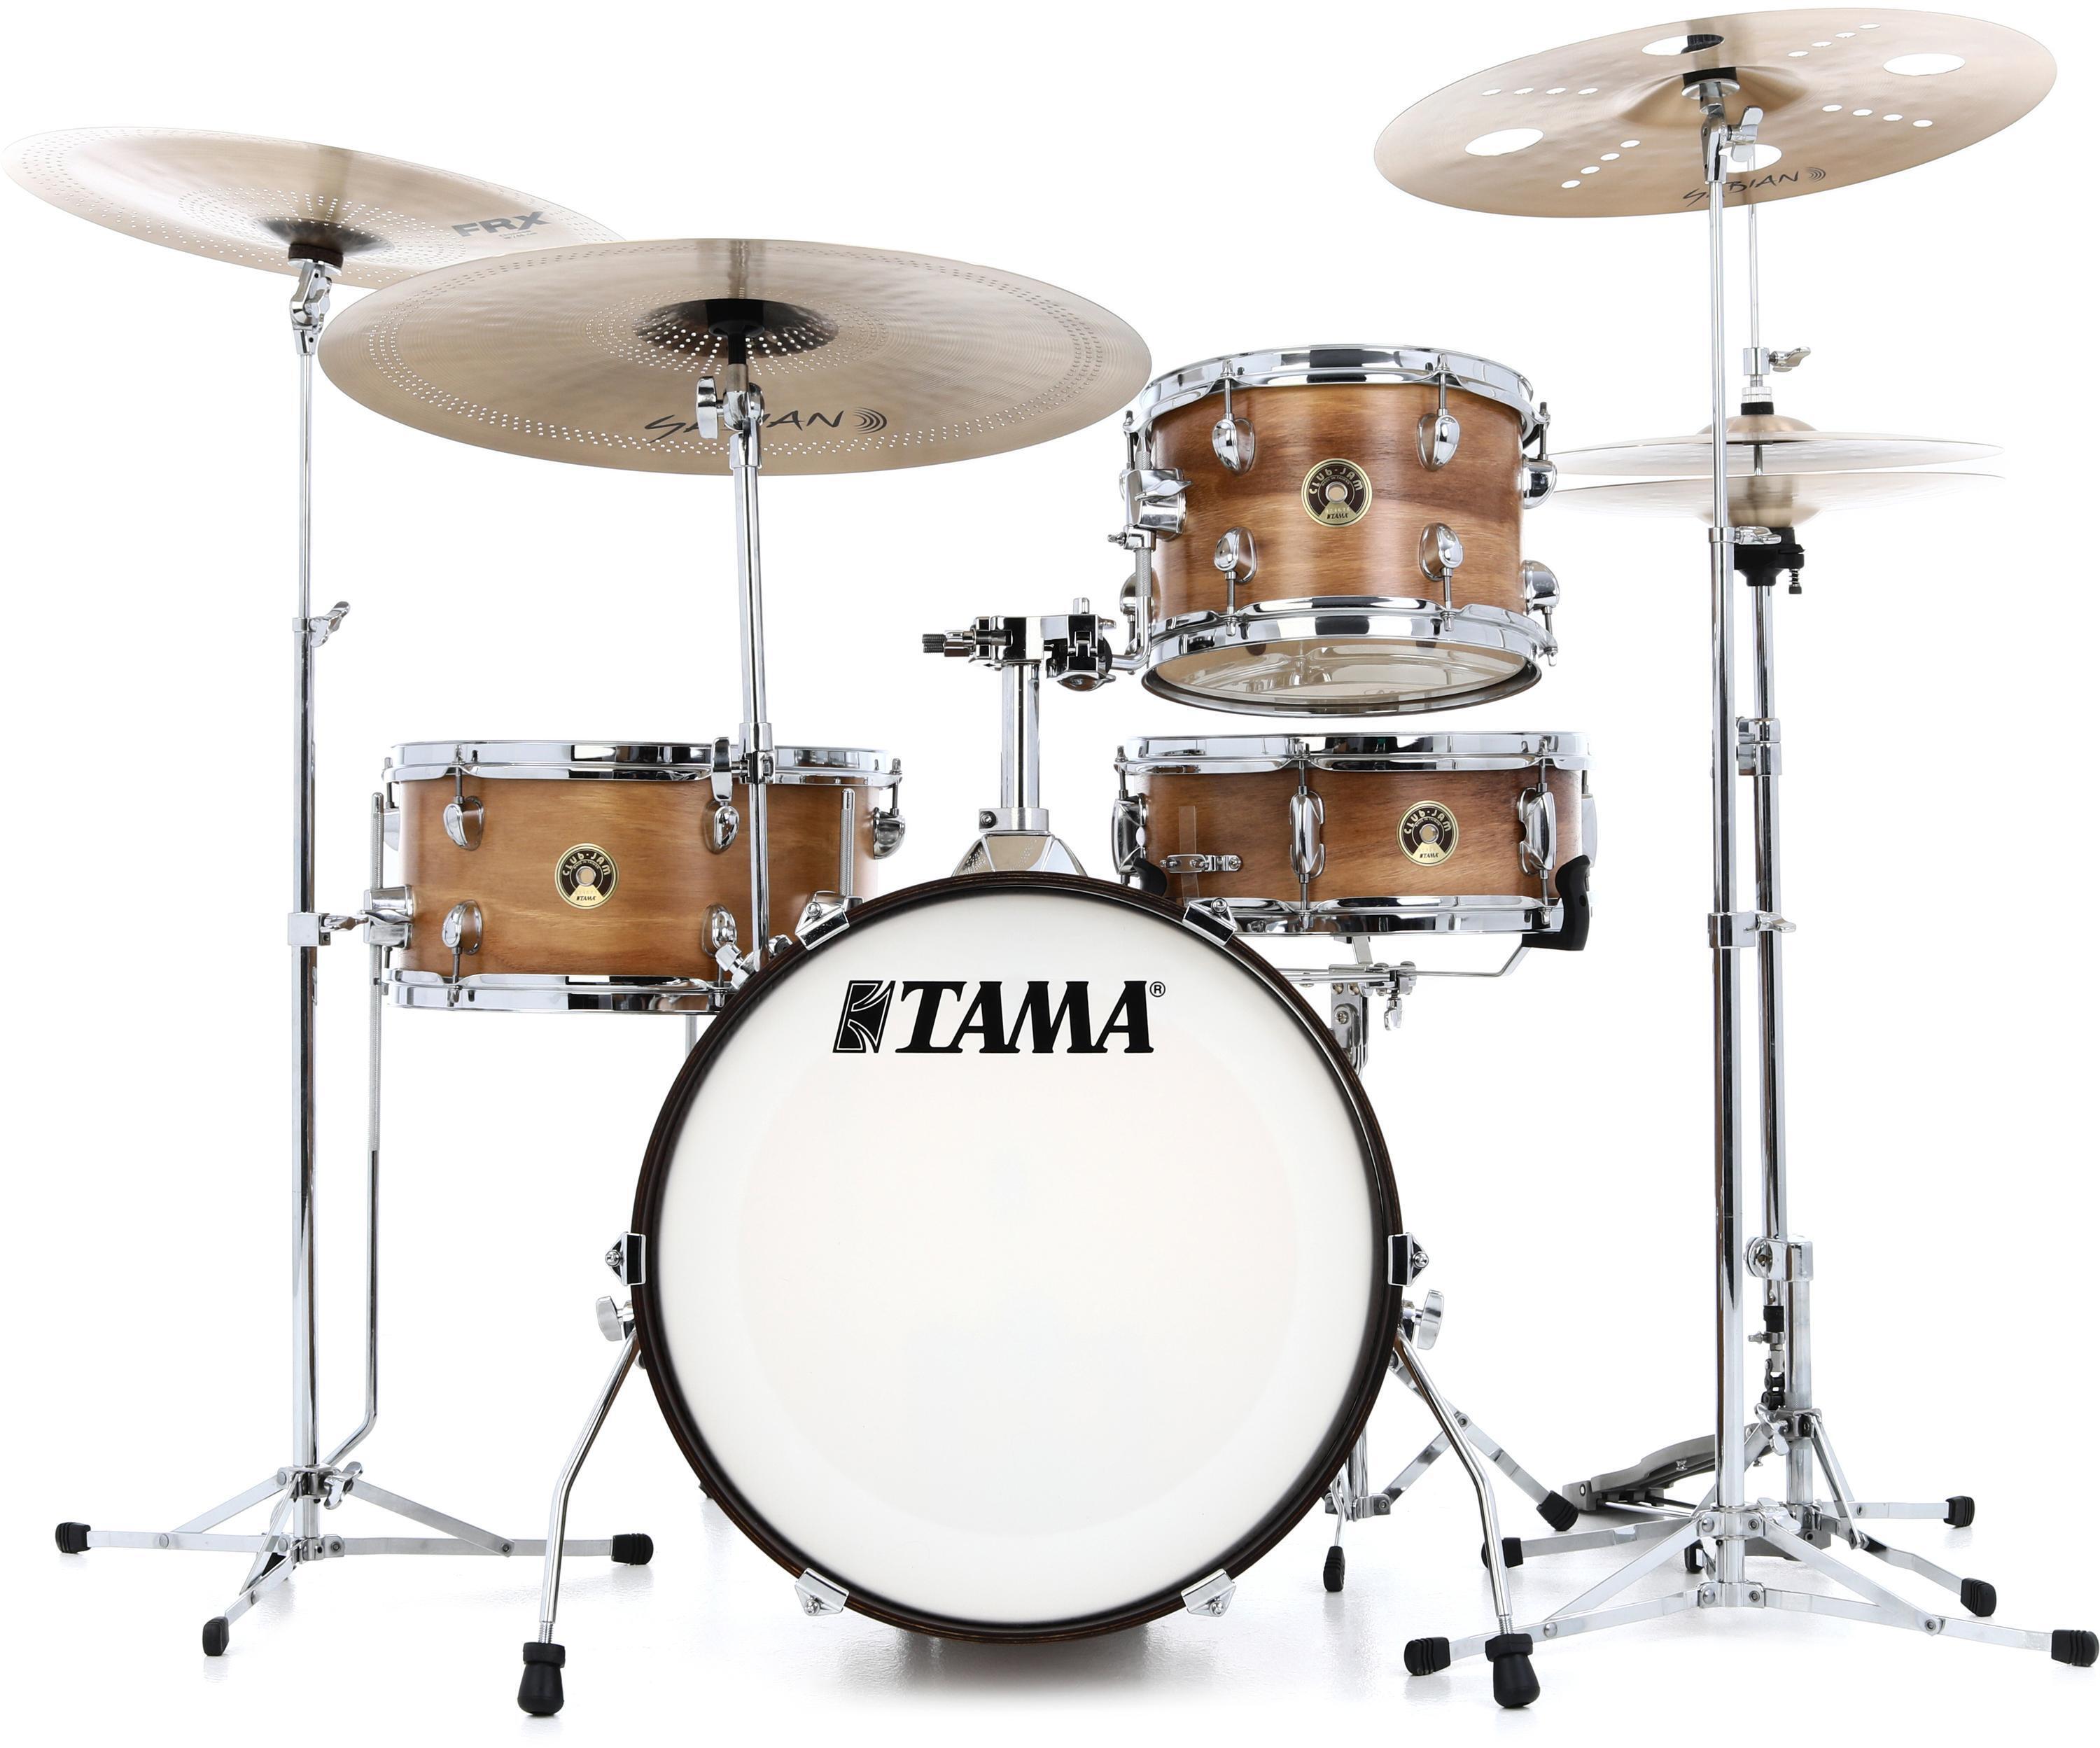 Tama Club-JAM LJL48S 4-piece Shell Pack with Snare Drum - Satin Blonde